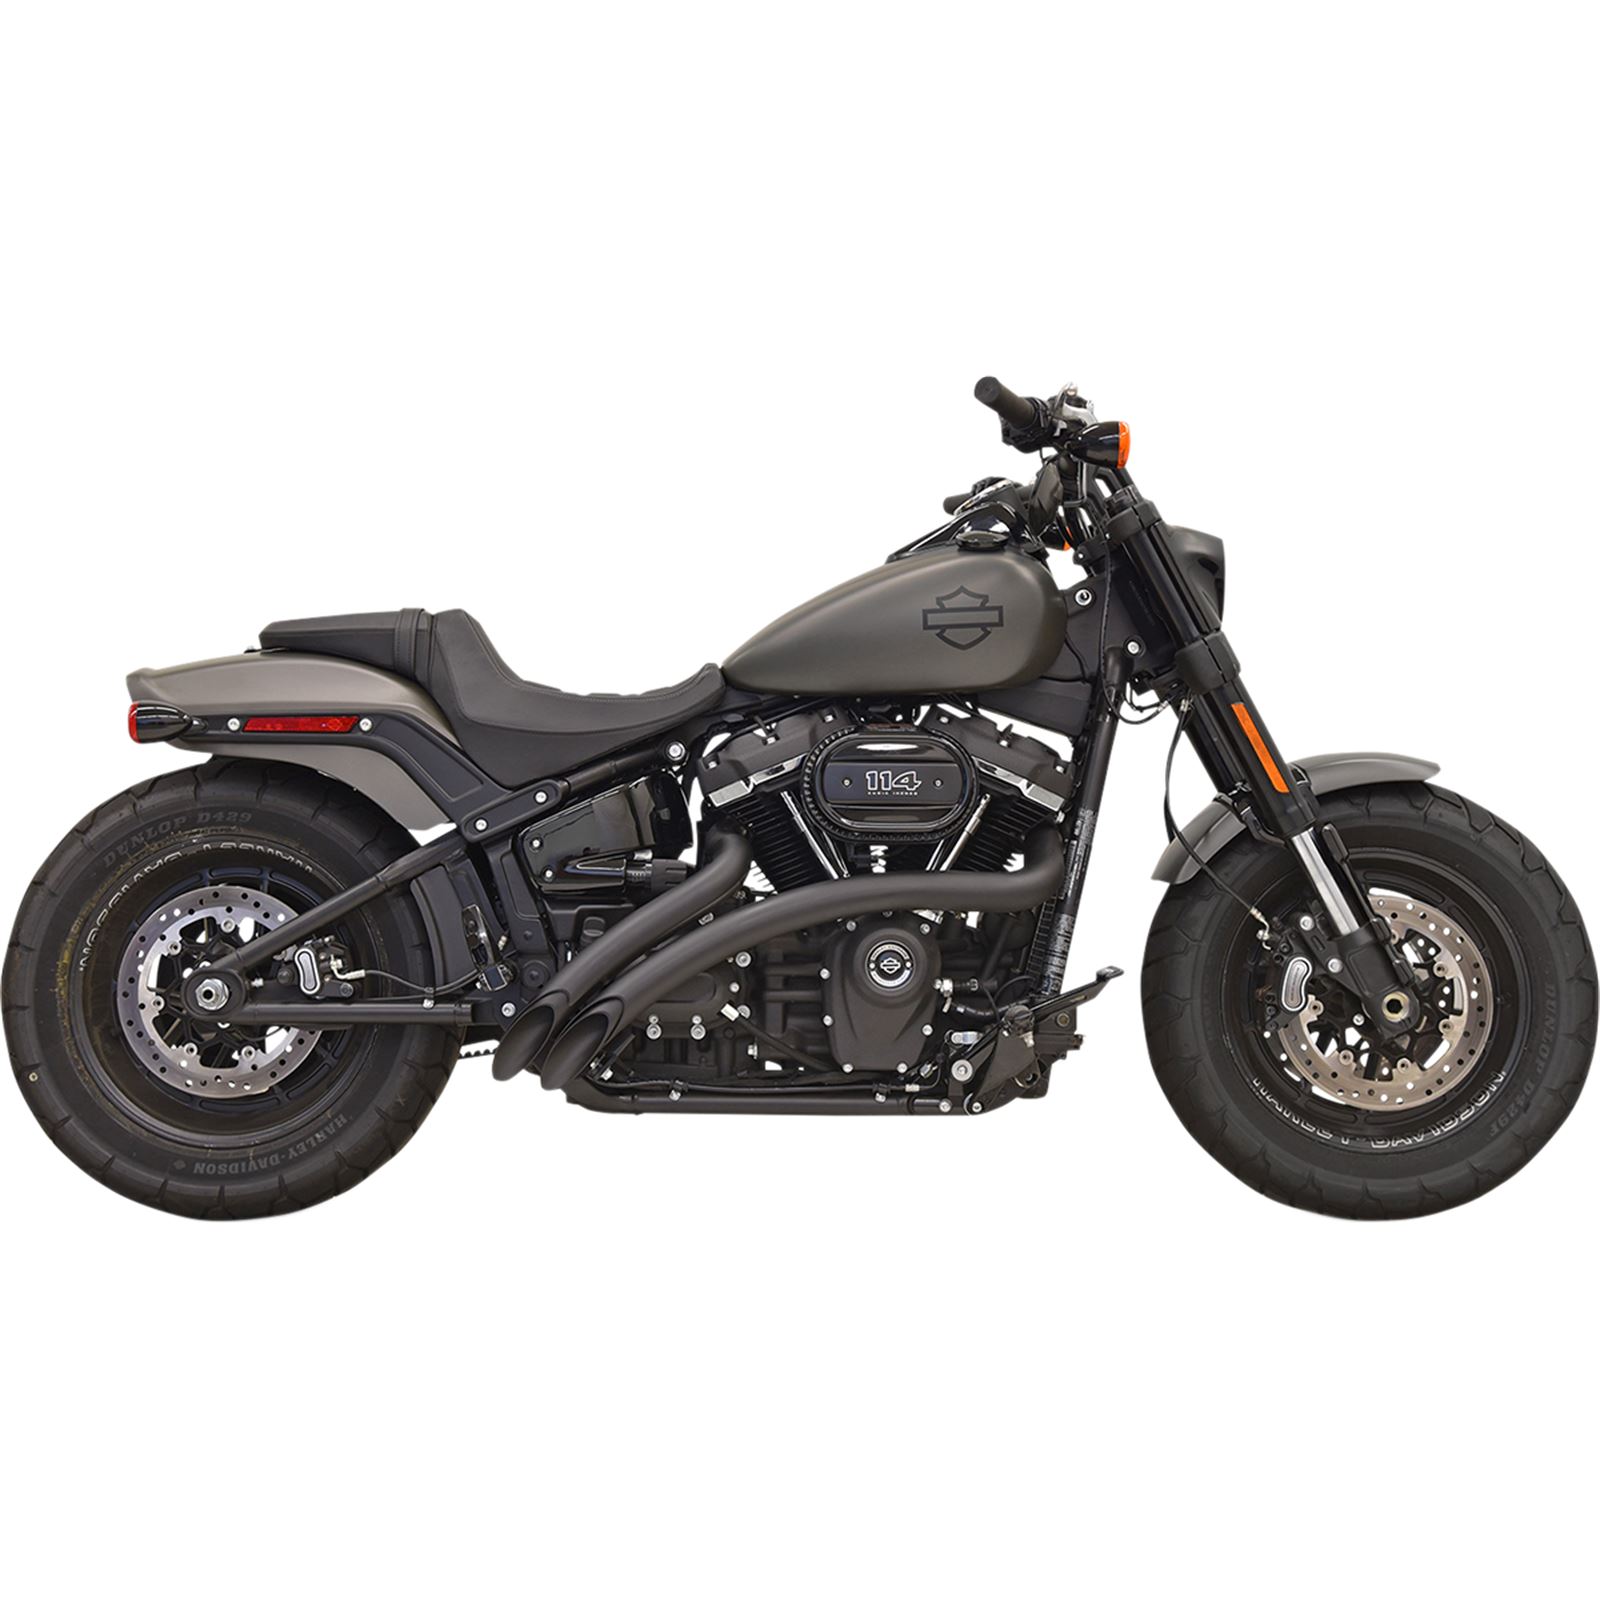 Bassani Manufacturing Radial Sweeper Exhaust - Black